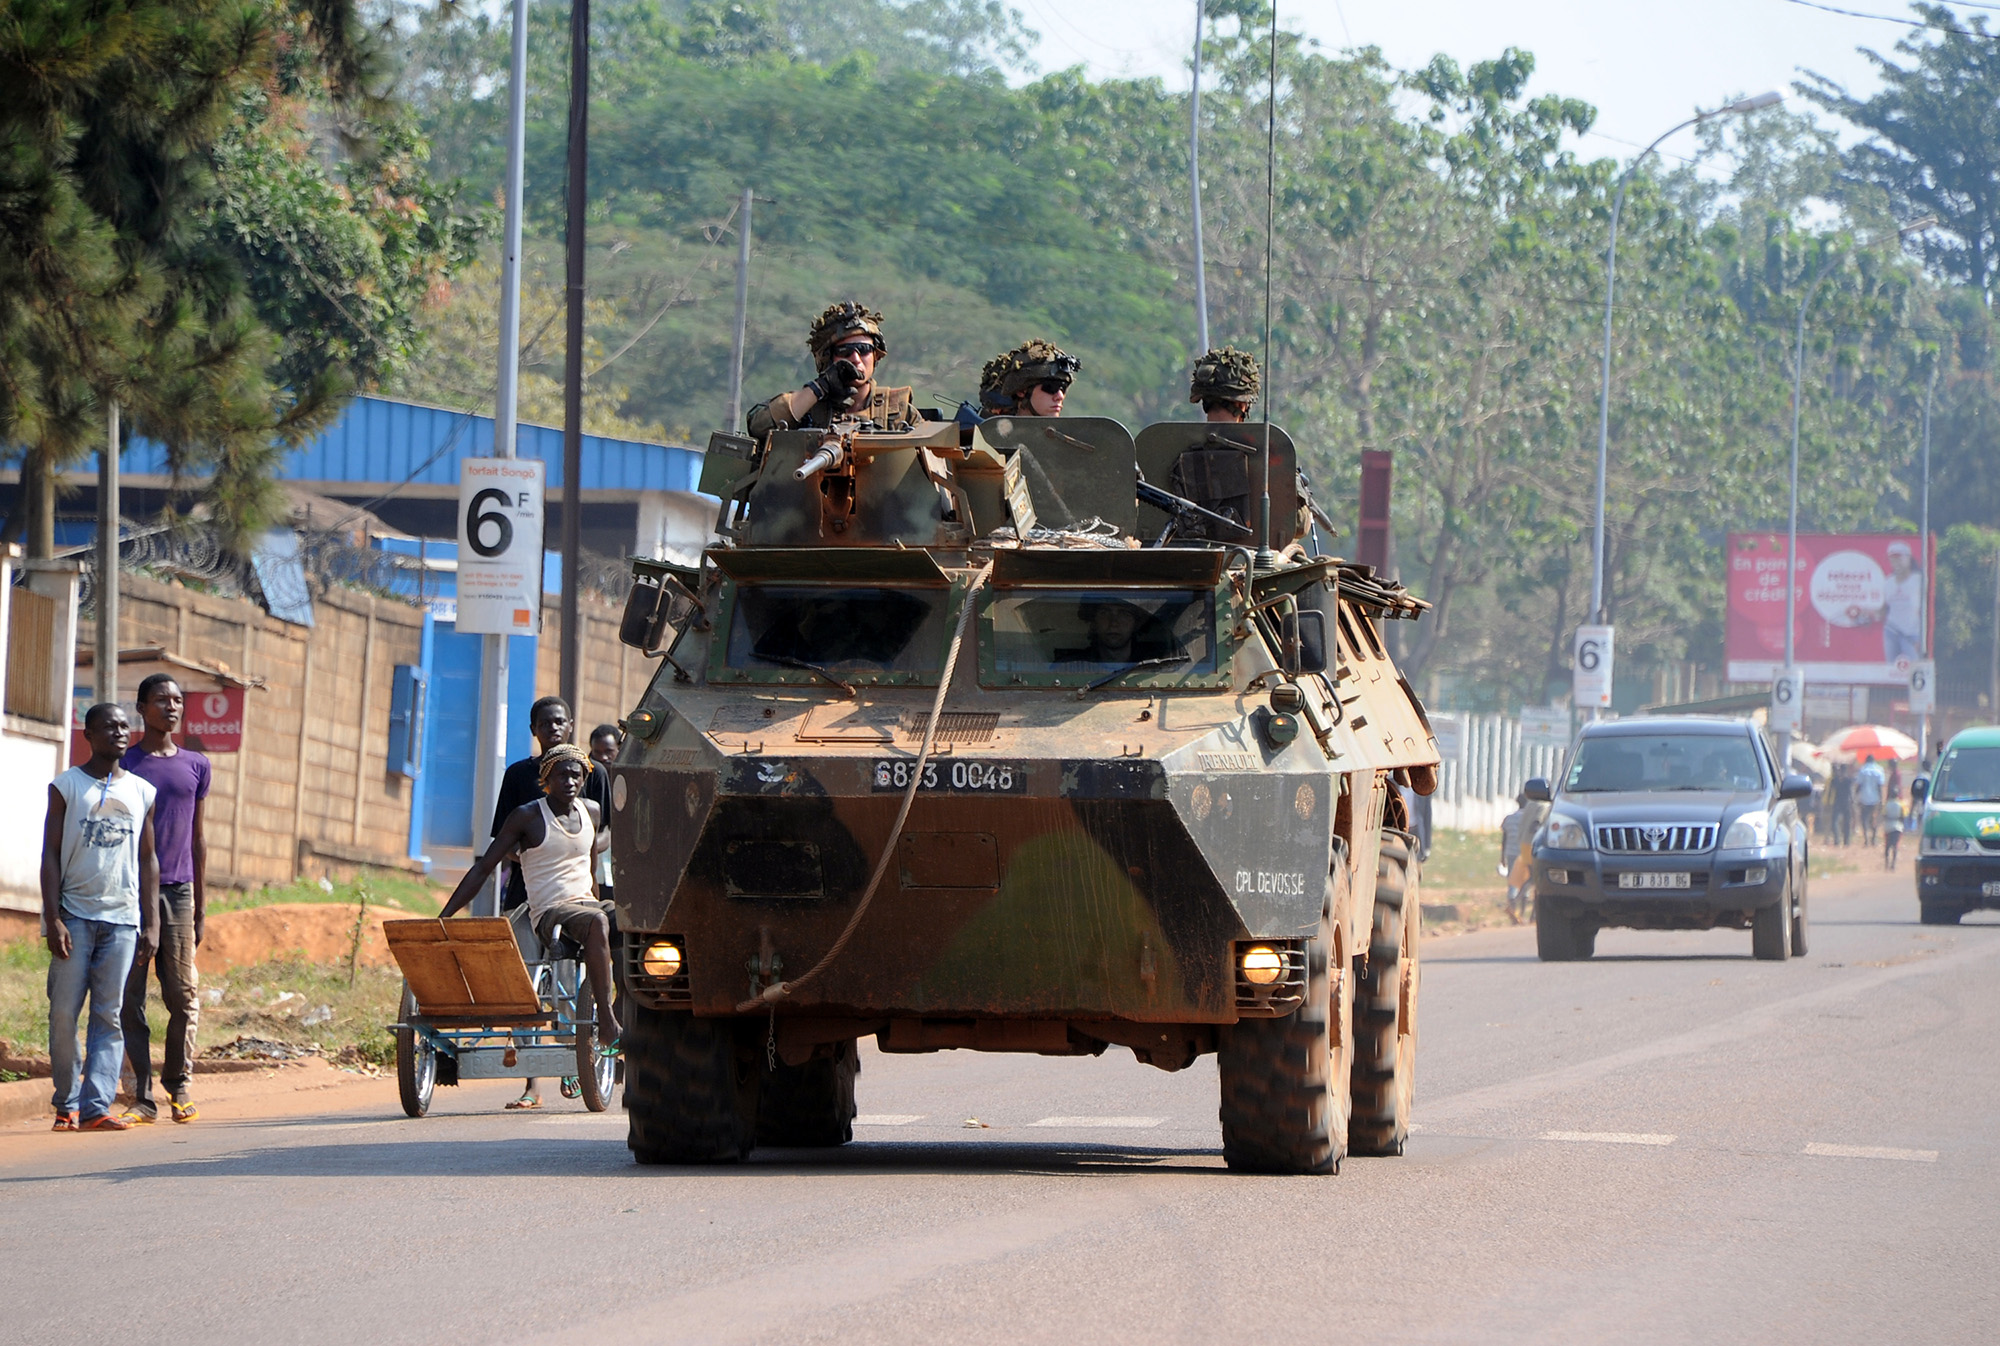 French soldiers patrol in an armored personnel carrier (VAB) in Bangui, Central African Republic, on December 1, 2013.